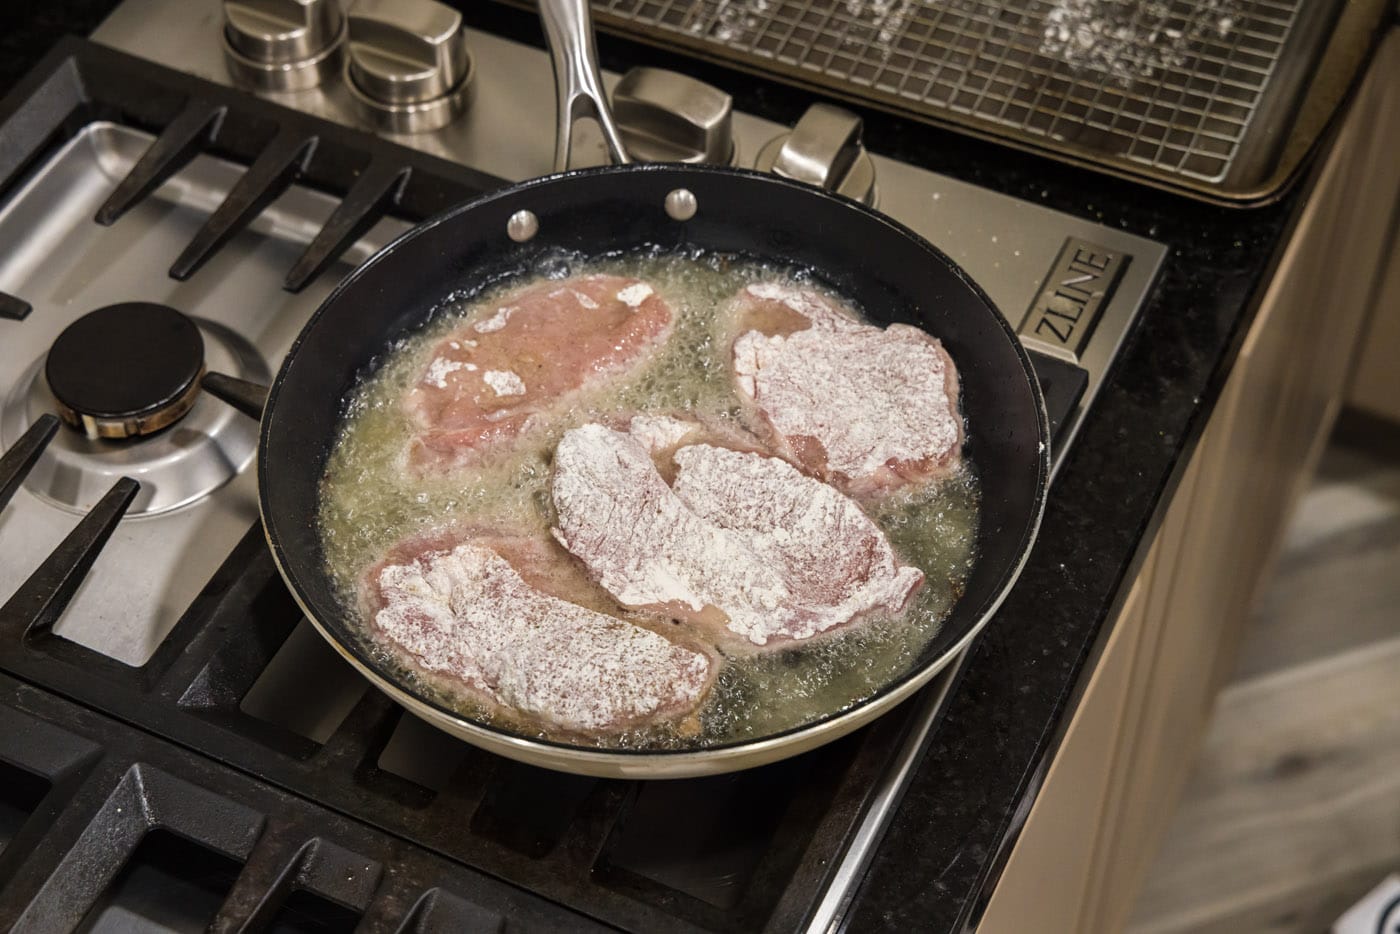 cooking flour coated veal in a skillet of oil